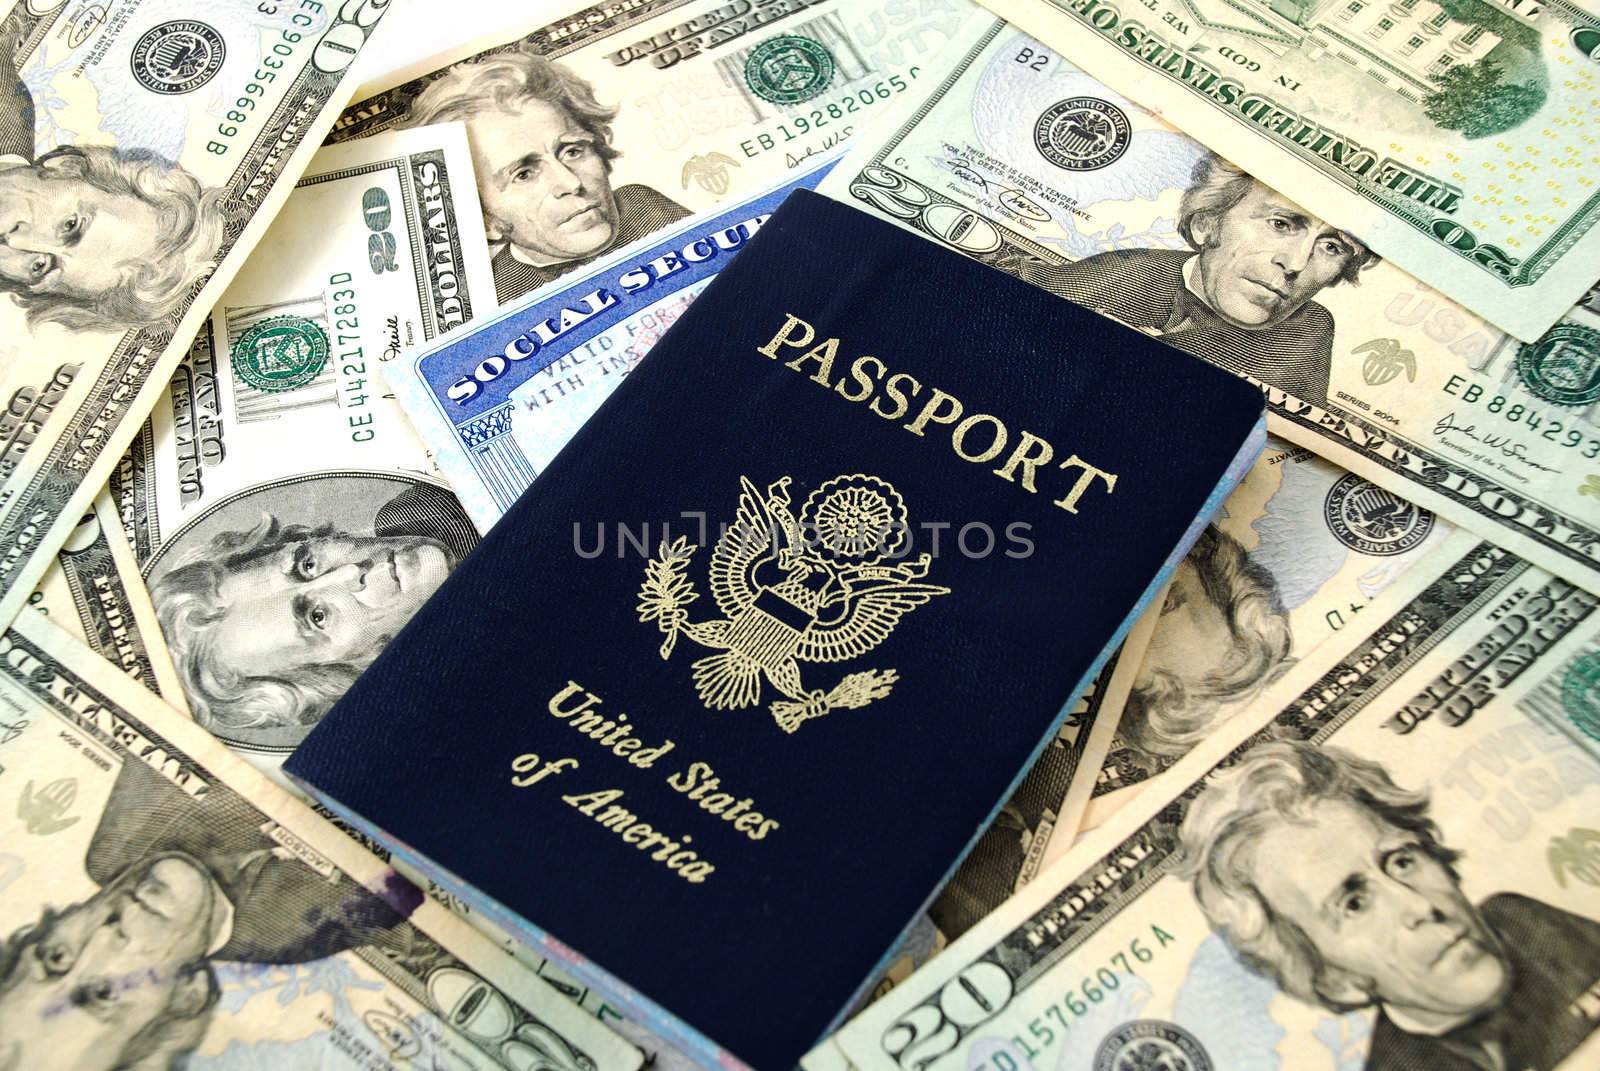 social security and passport by albln